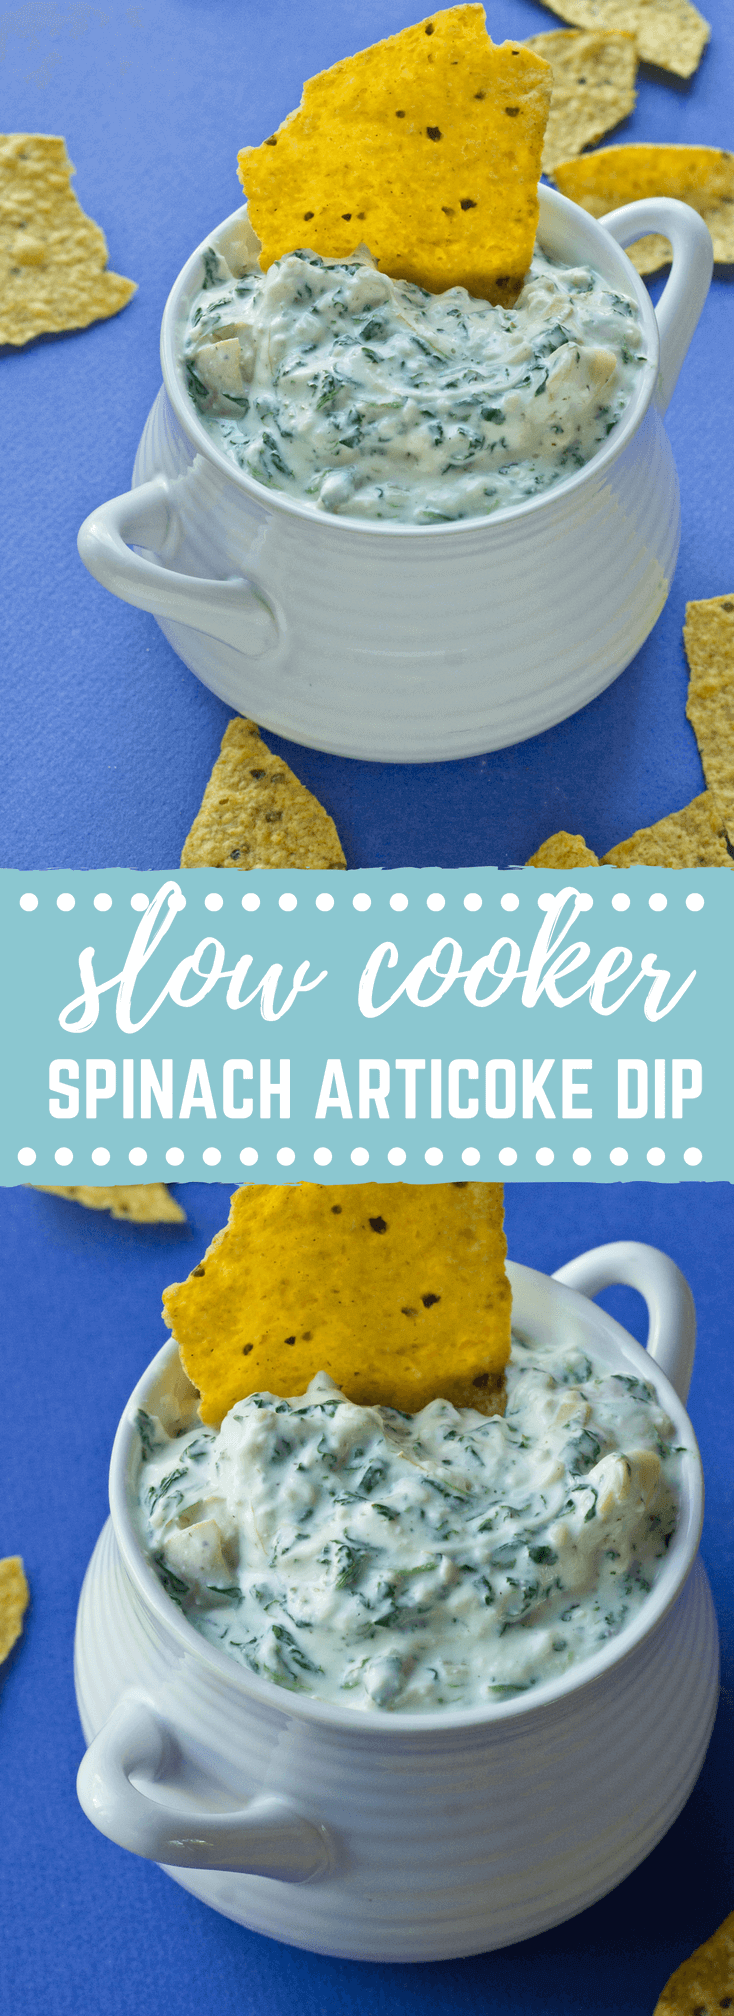 Who needs an EASY last minute crowd pleasing appetizer? Get the chips and crudités ready, this recipe for Slow Cooker Spinach Artichoke Dip one is super yum! 